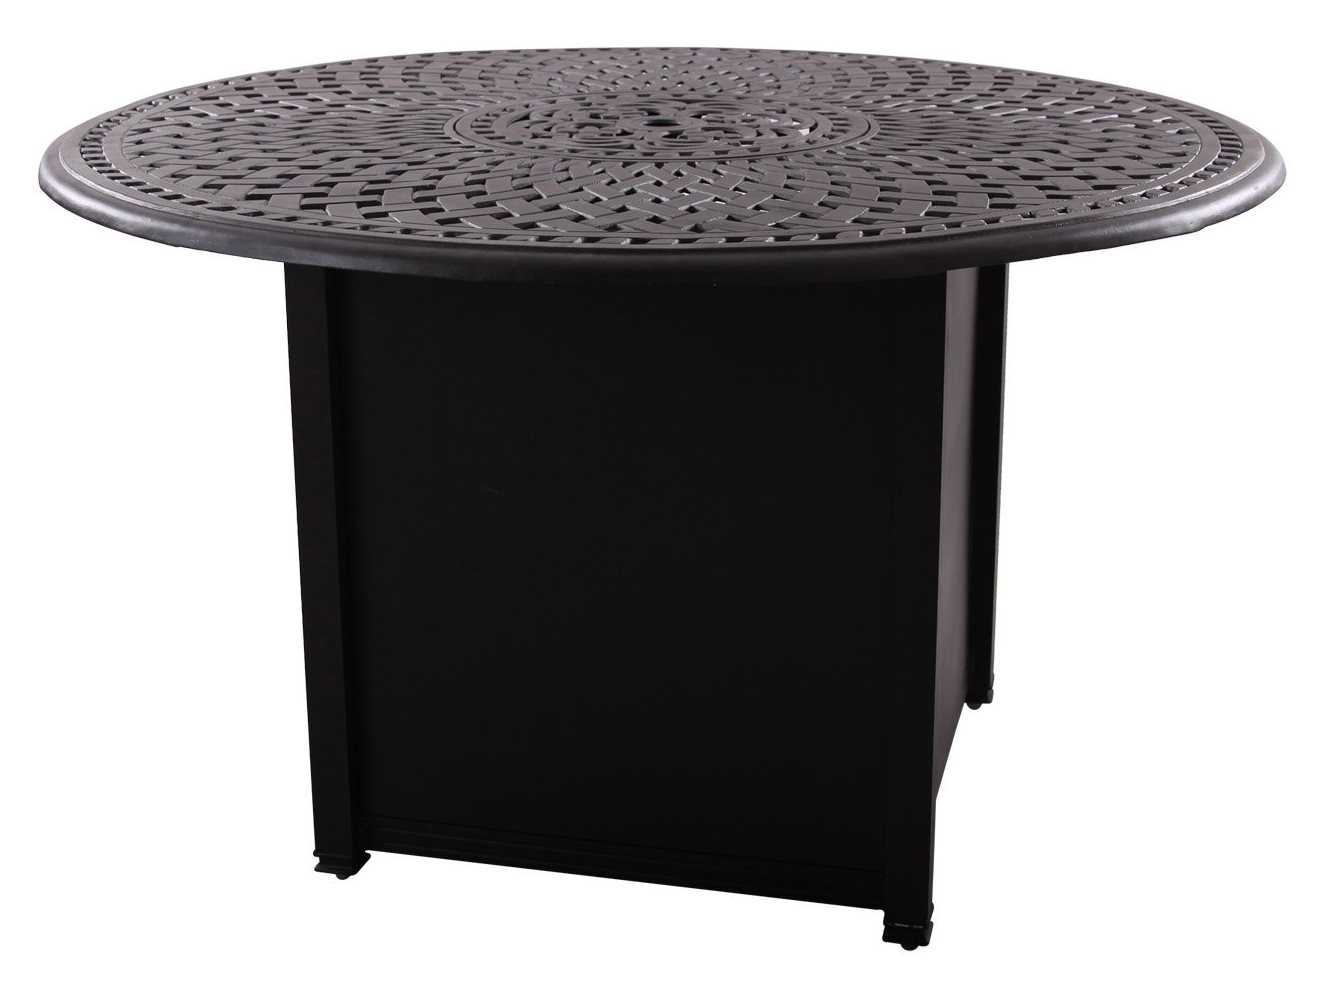 Propane Fire Pit Table, Darlee Series 80 Fire Pit Table